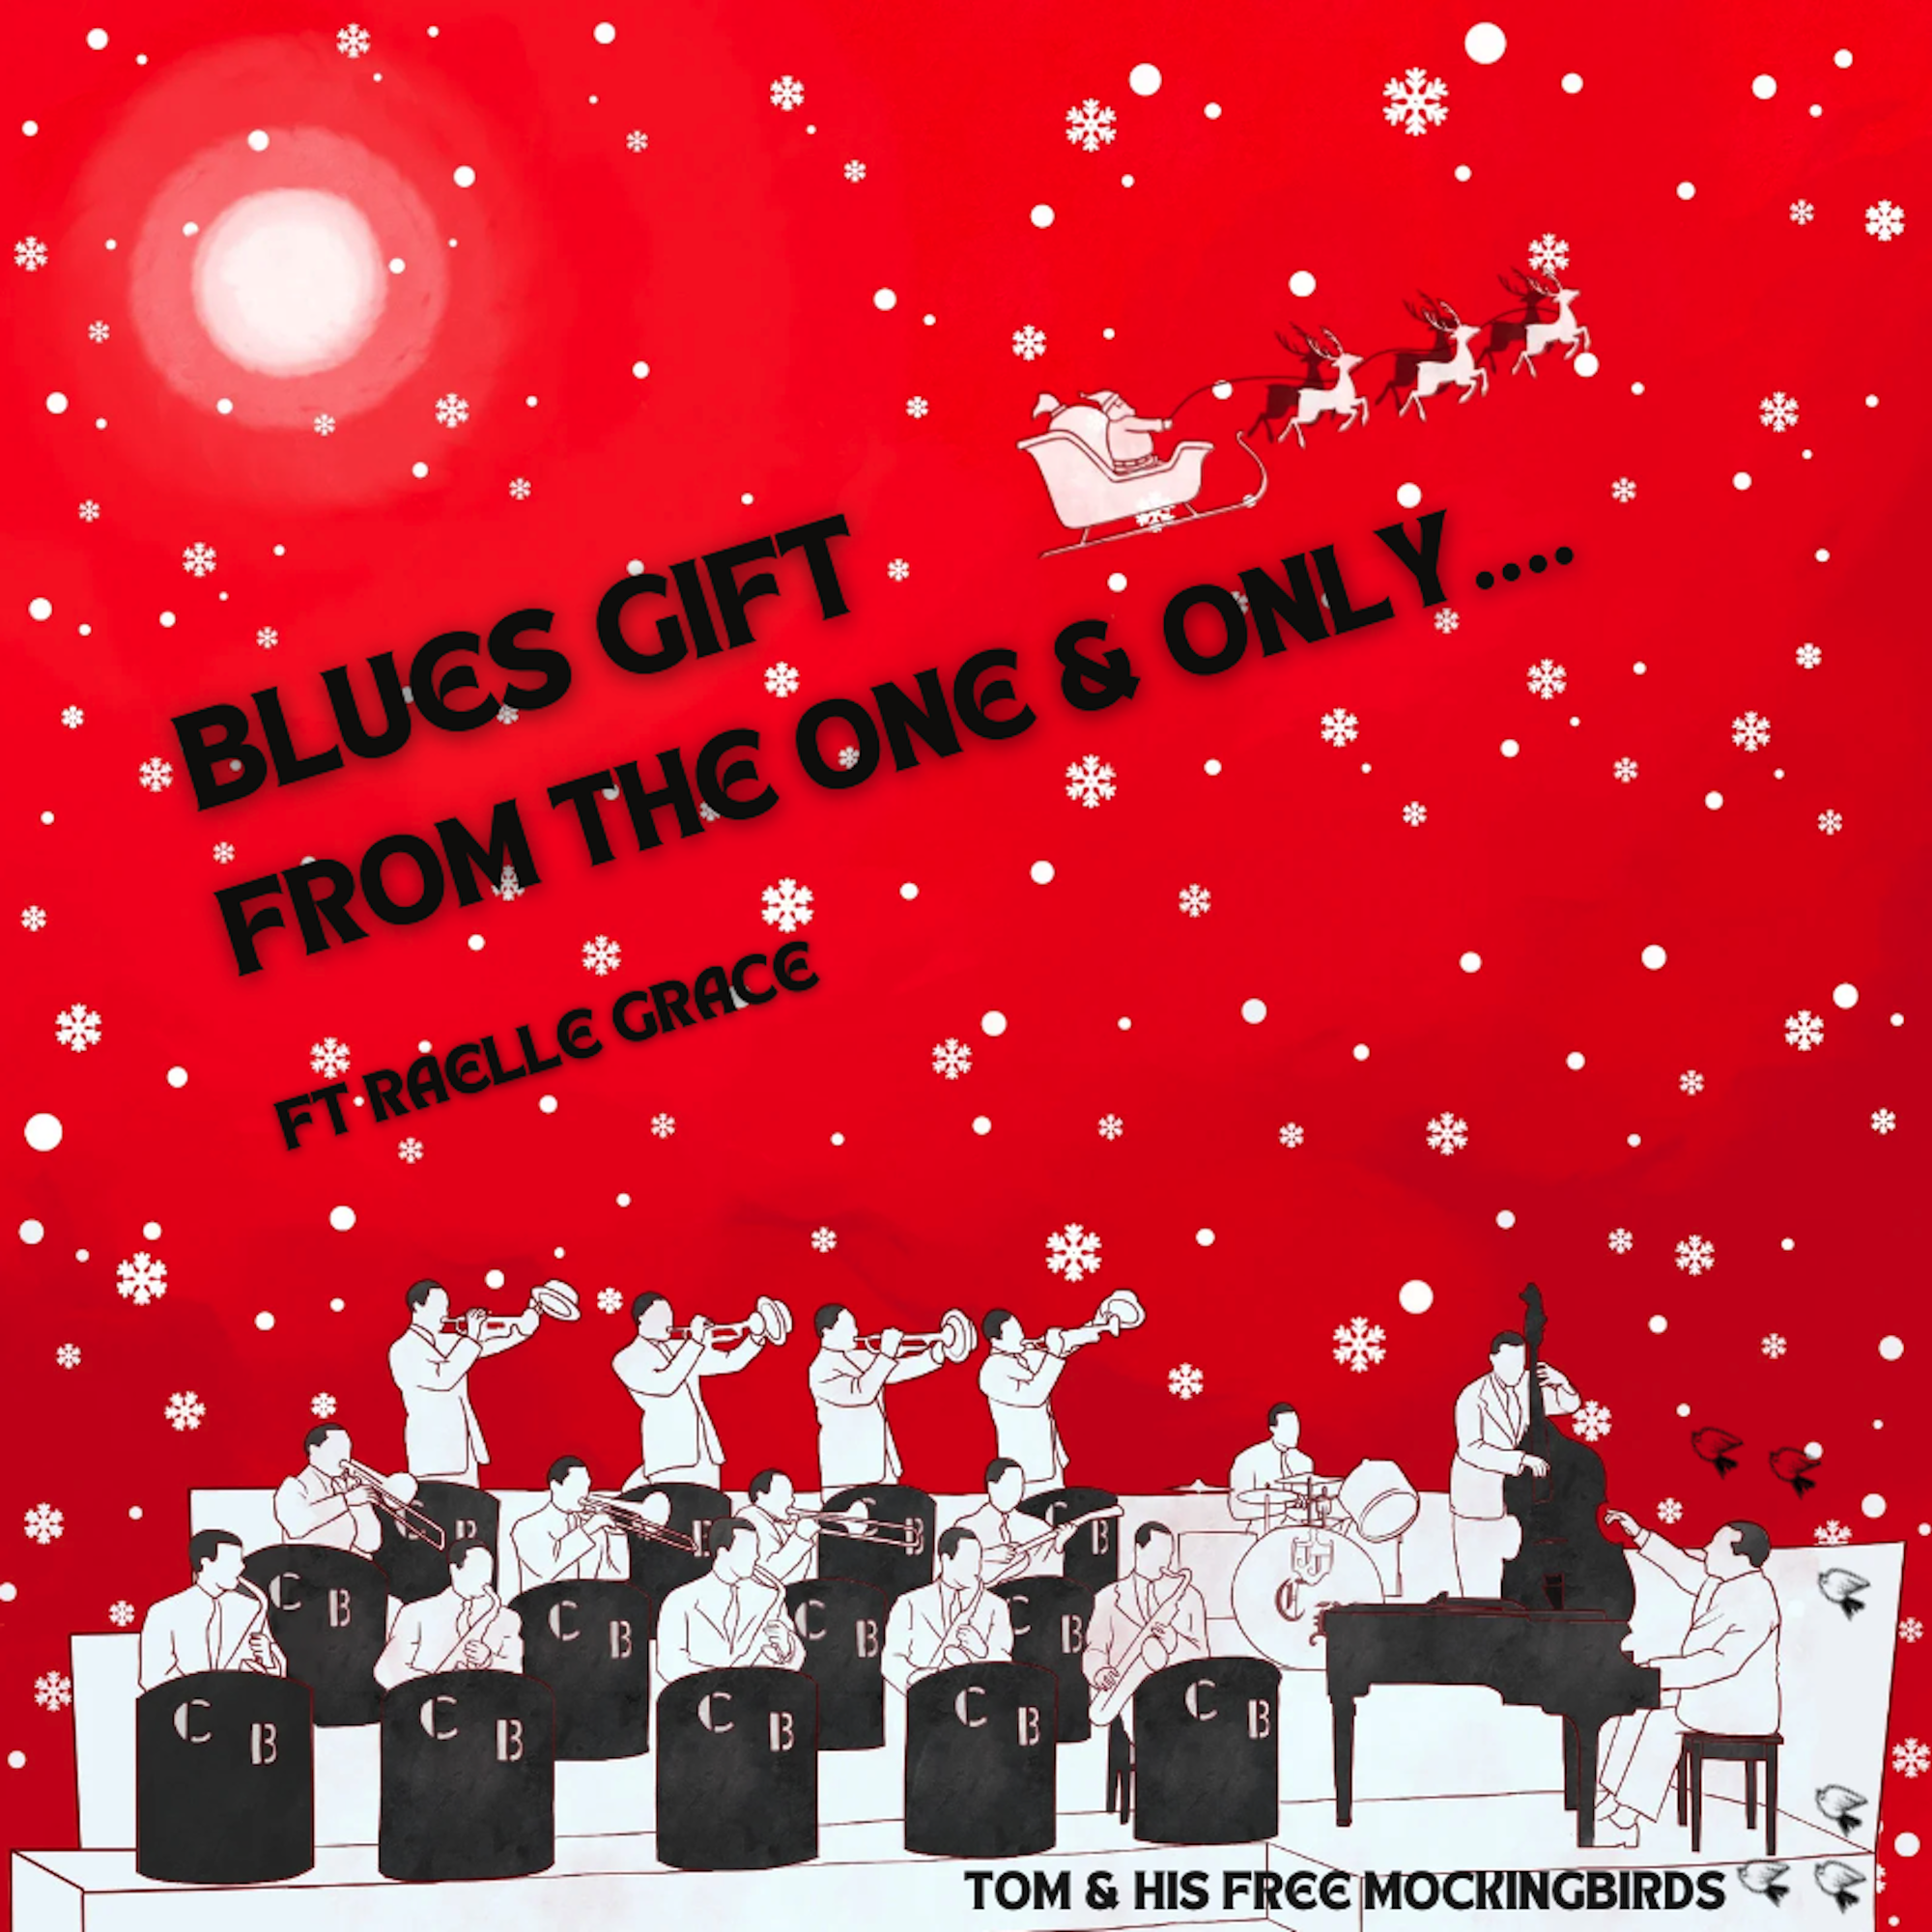 From Count Basie’s Inspiration to Bafana FM Holiday Playlist: ‘Blues Gift from the One & Only’ by Tom & His Free Mockingbirds Featuring Raelle Grace